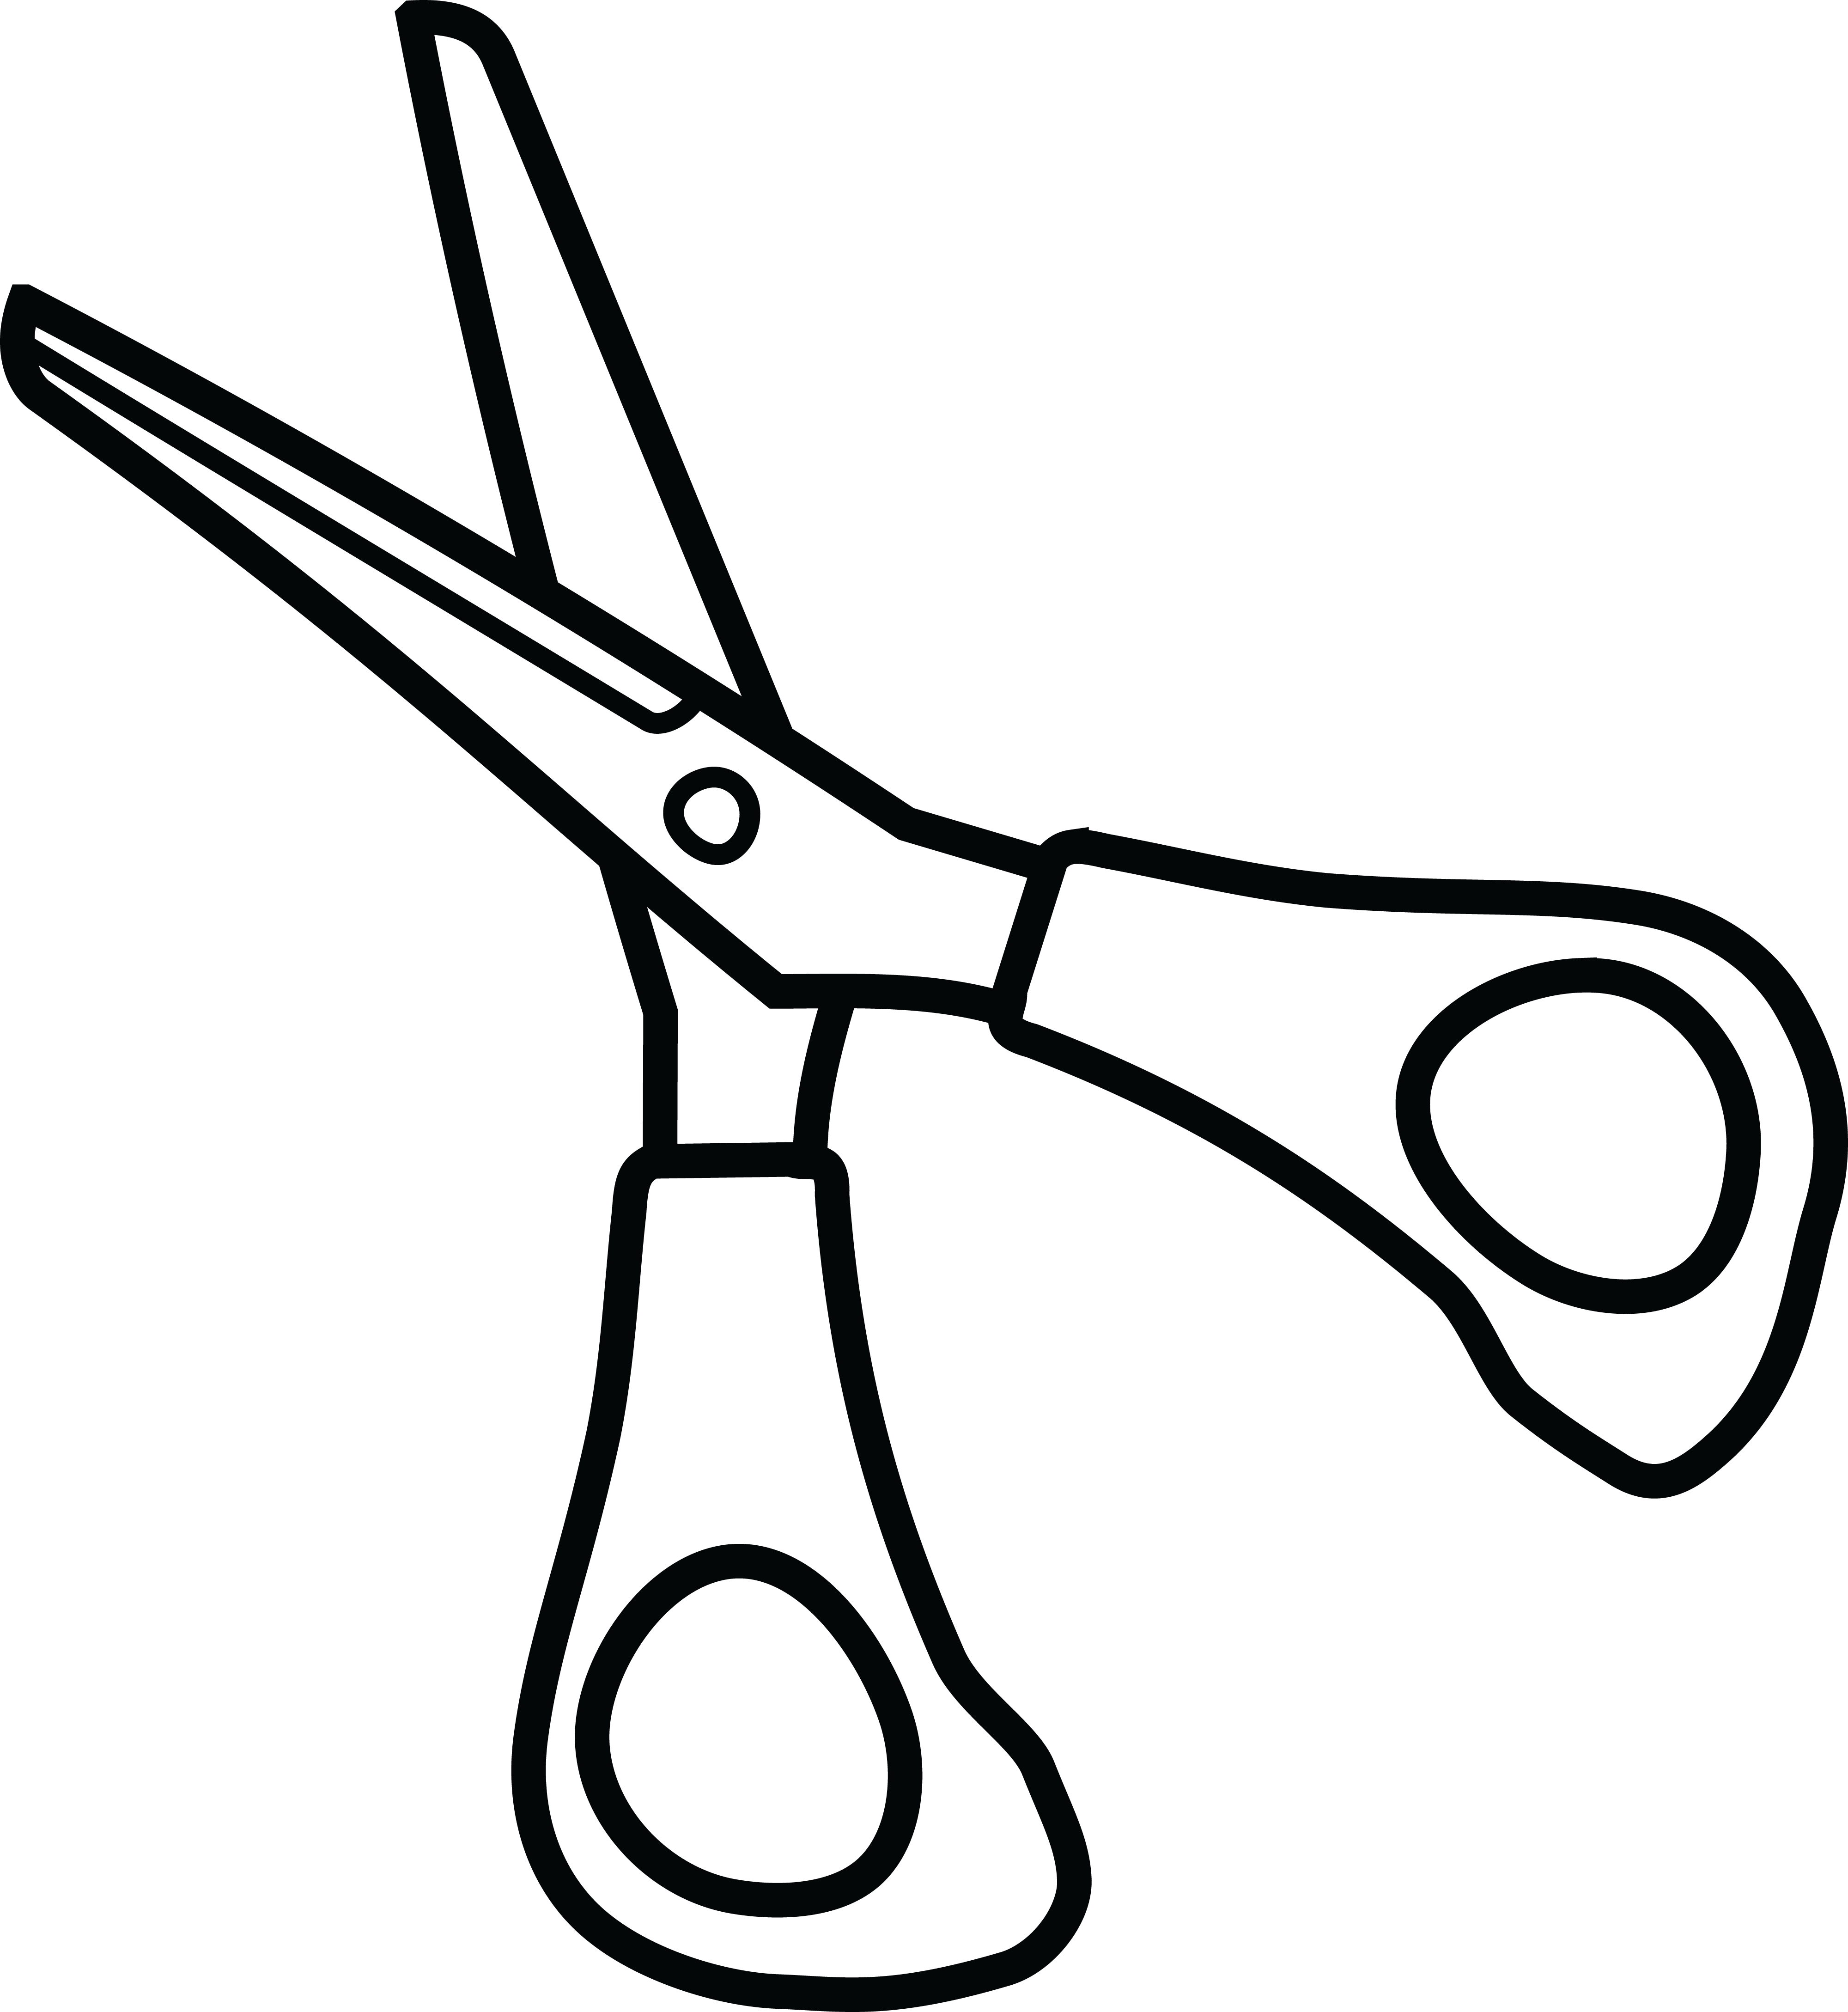 Haircut clipart baber. Collection of free cessor